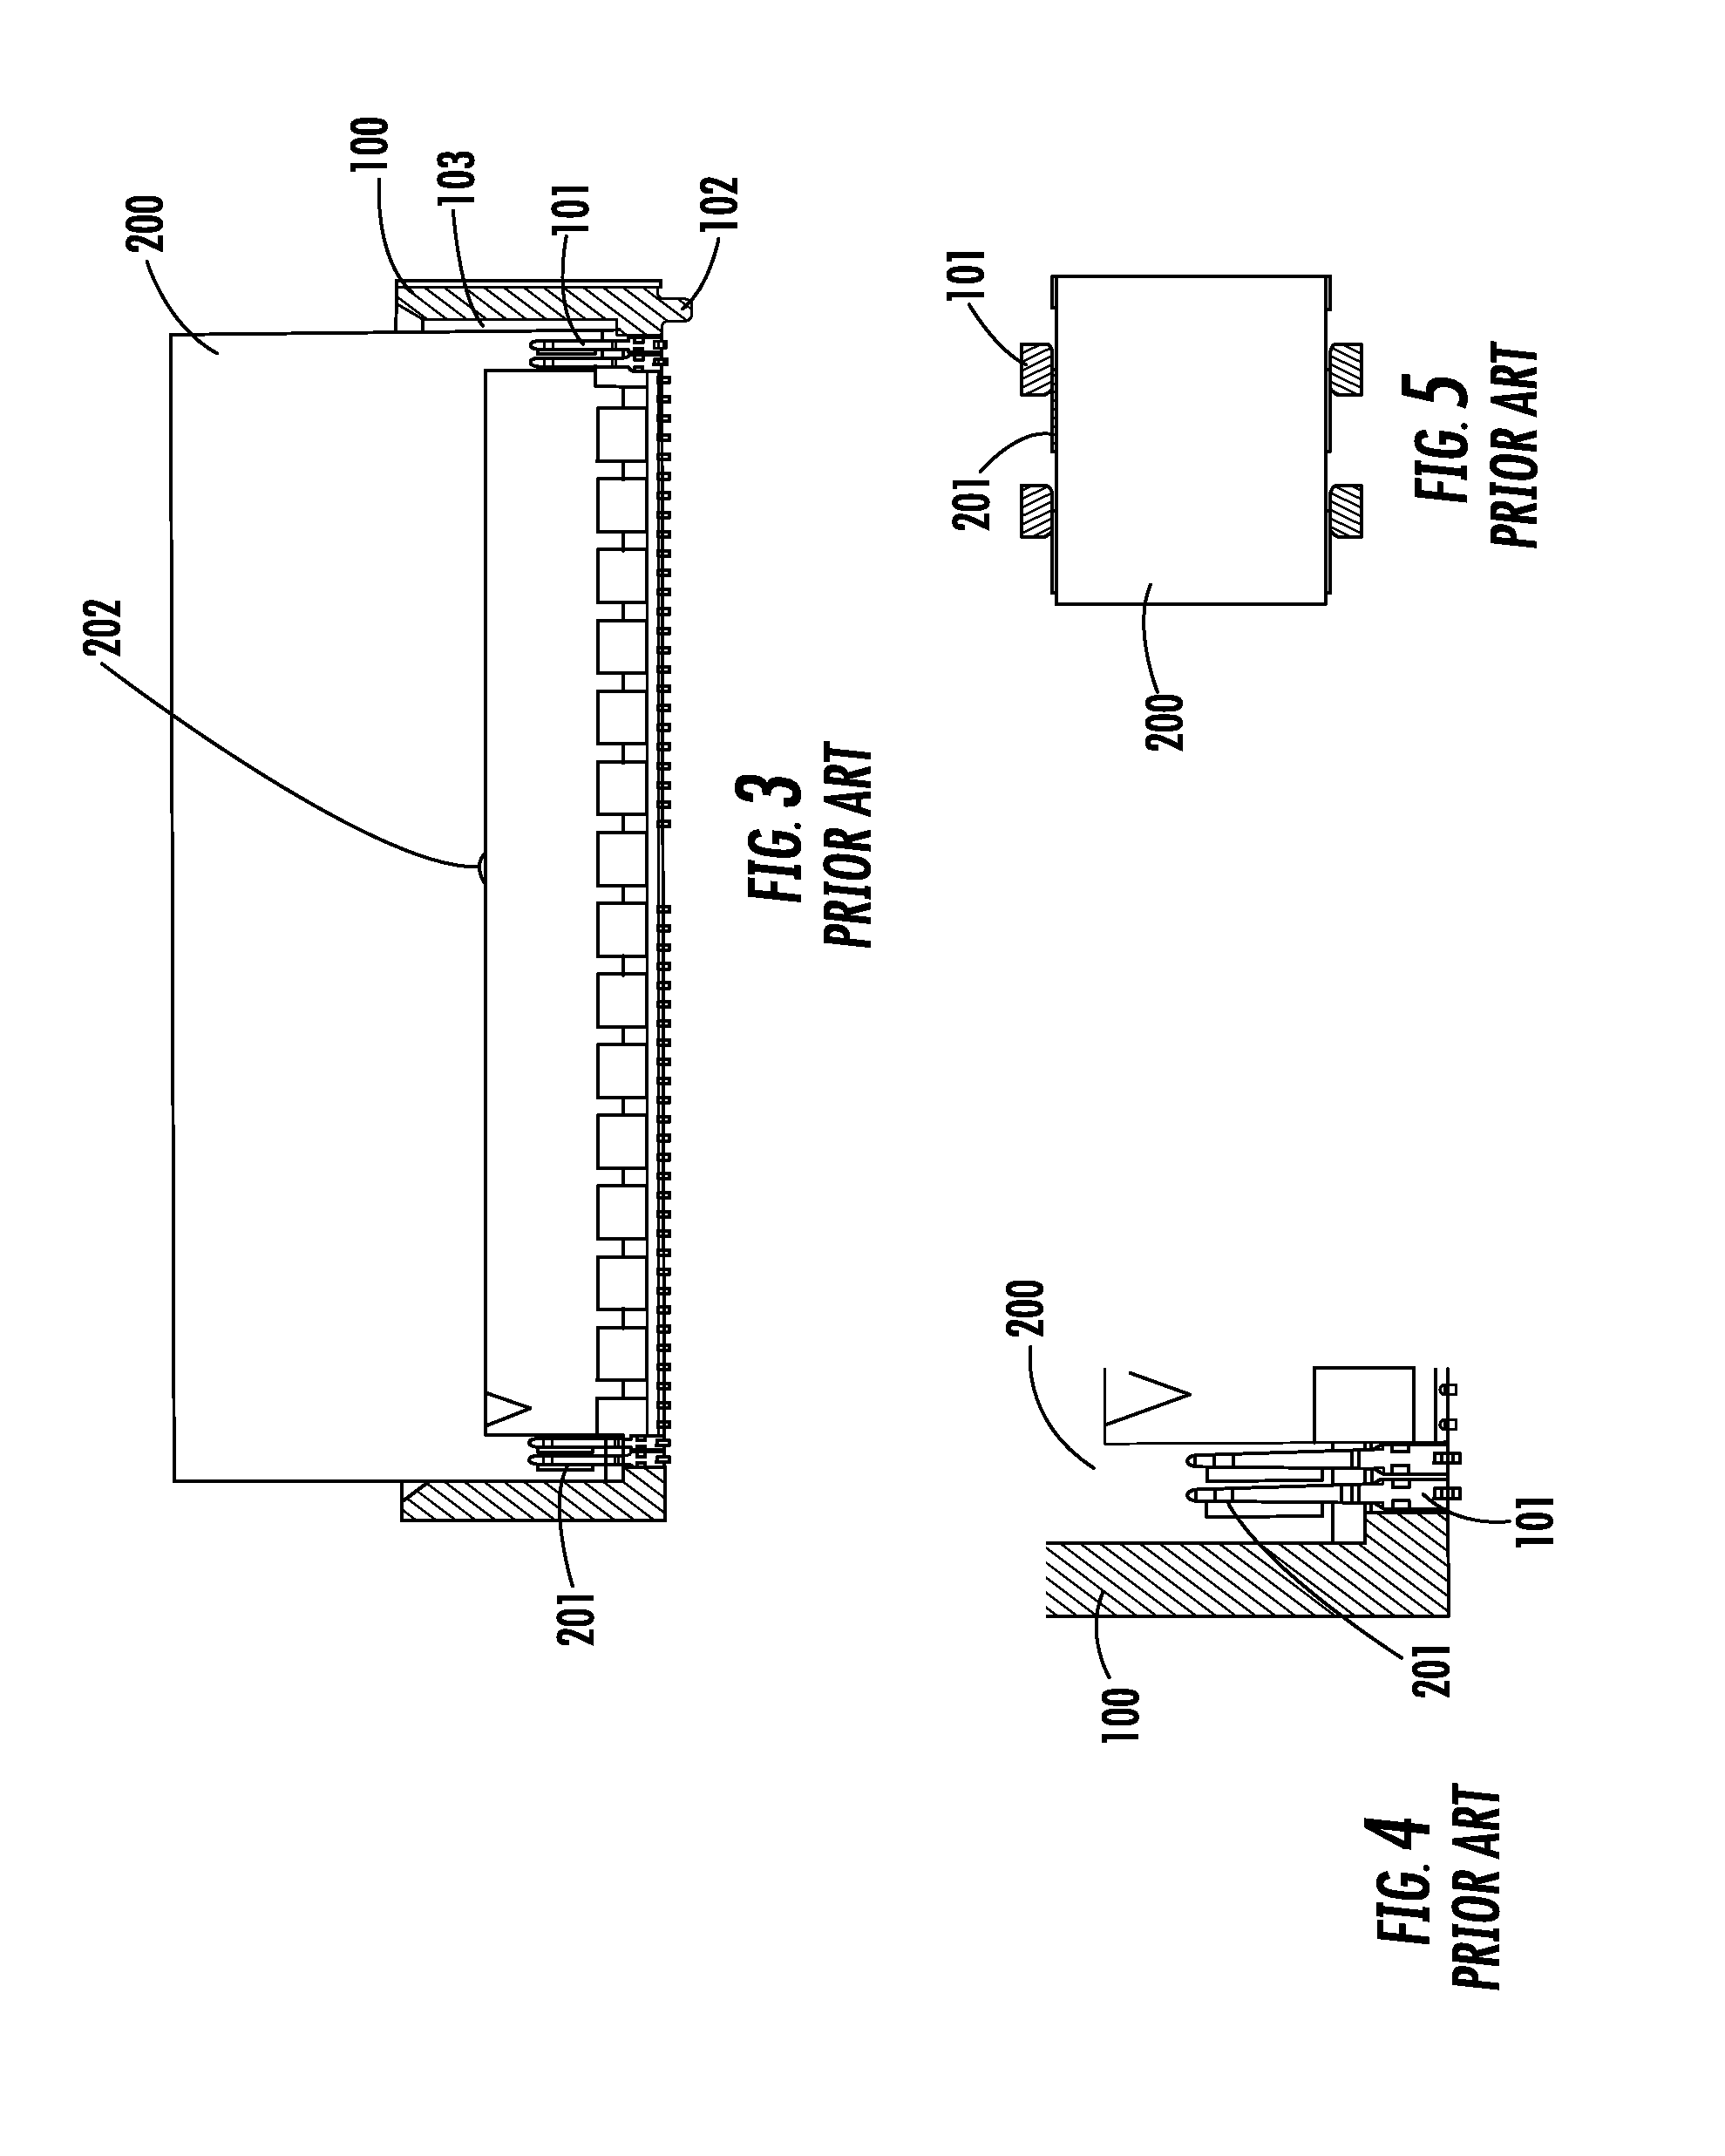 Edgecard connector with common-end datum to reduce misalignment tolerances